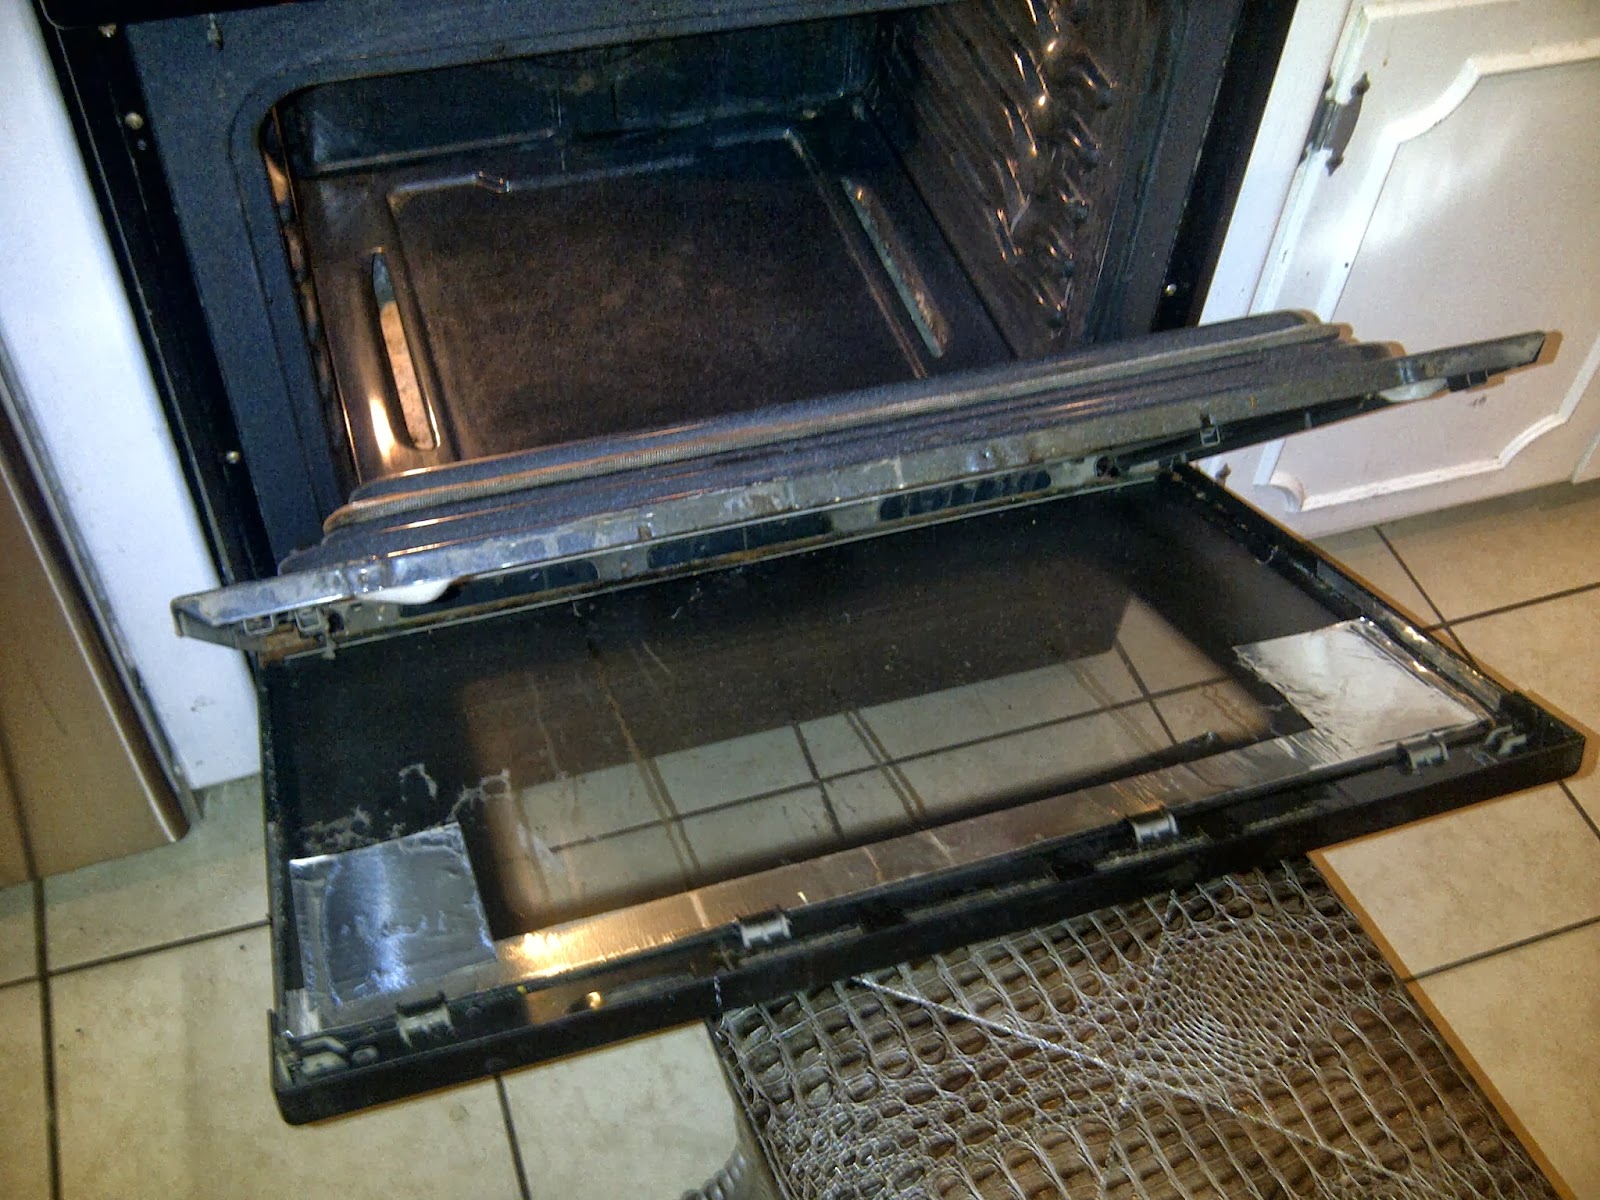 How To Clean Oven